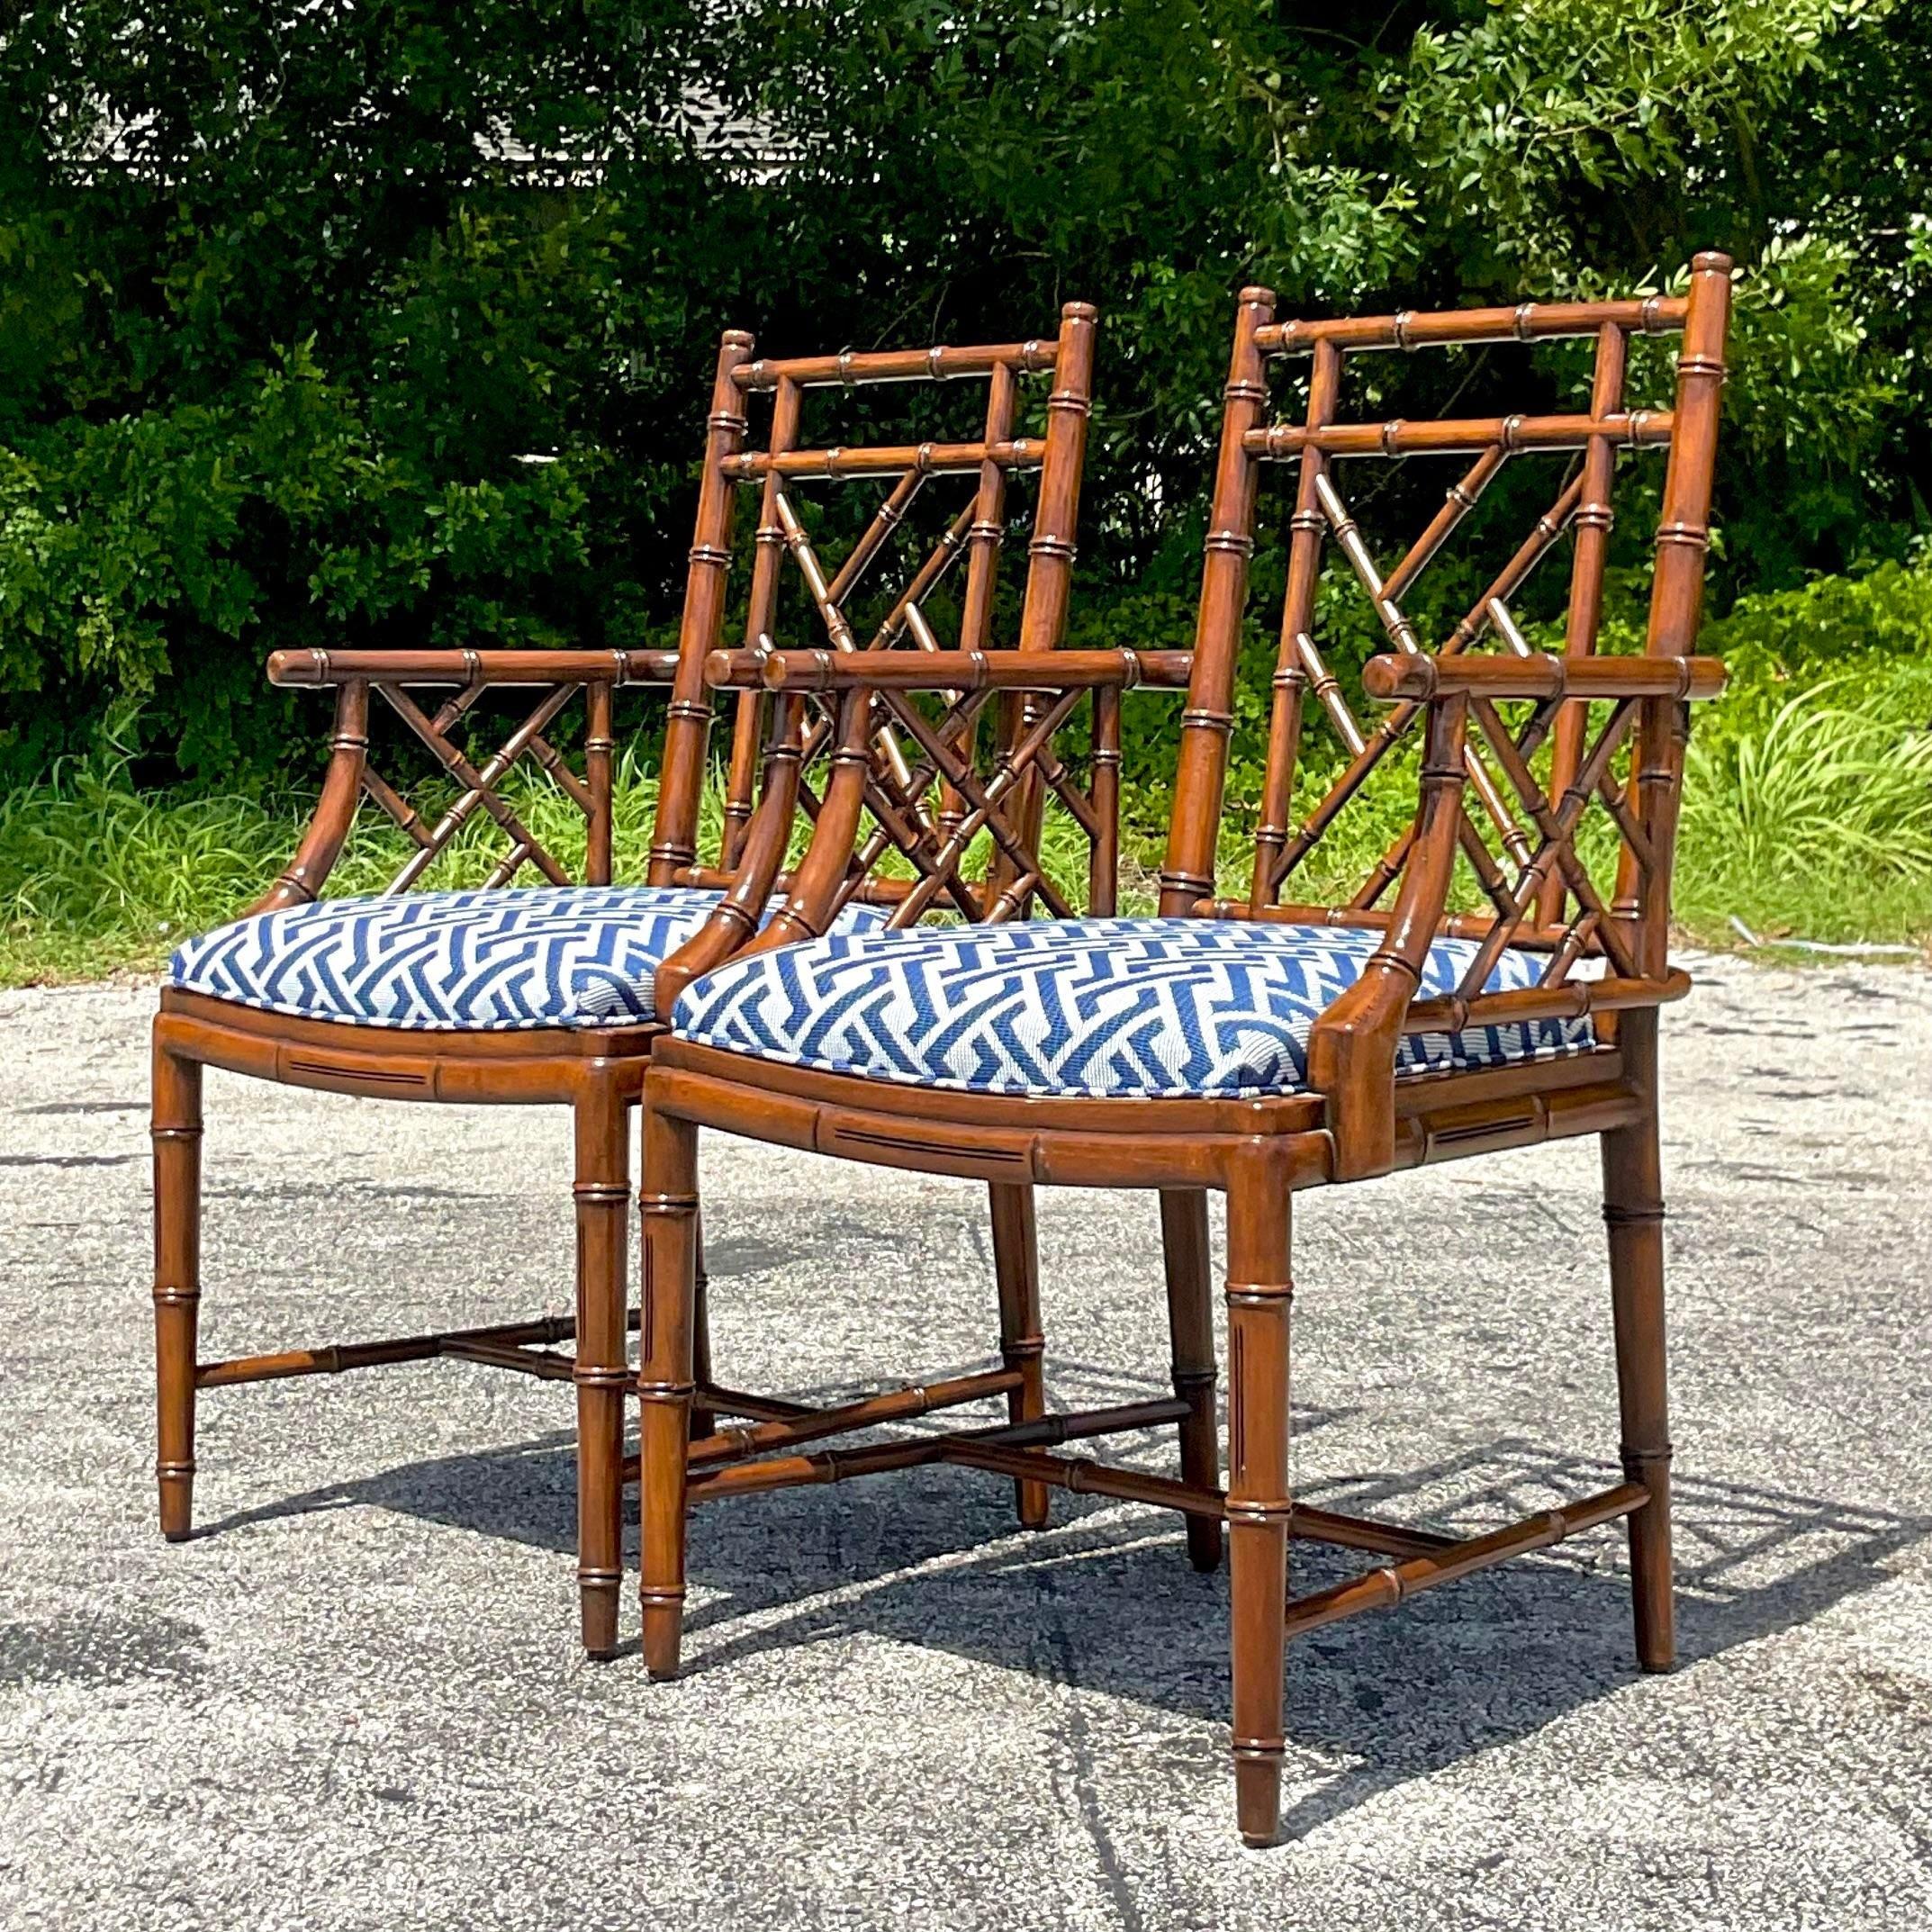 20th Century Vintage Regency William Switzer Chinese Chippendale Arm Chairs - a Pair For Sale